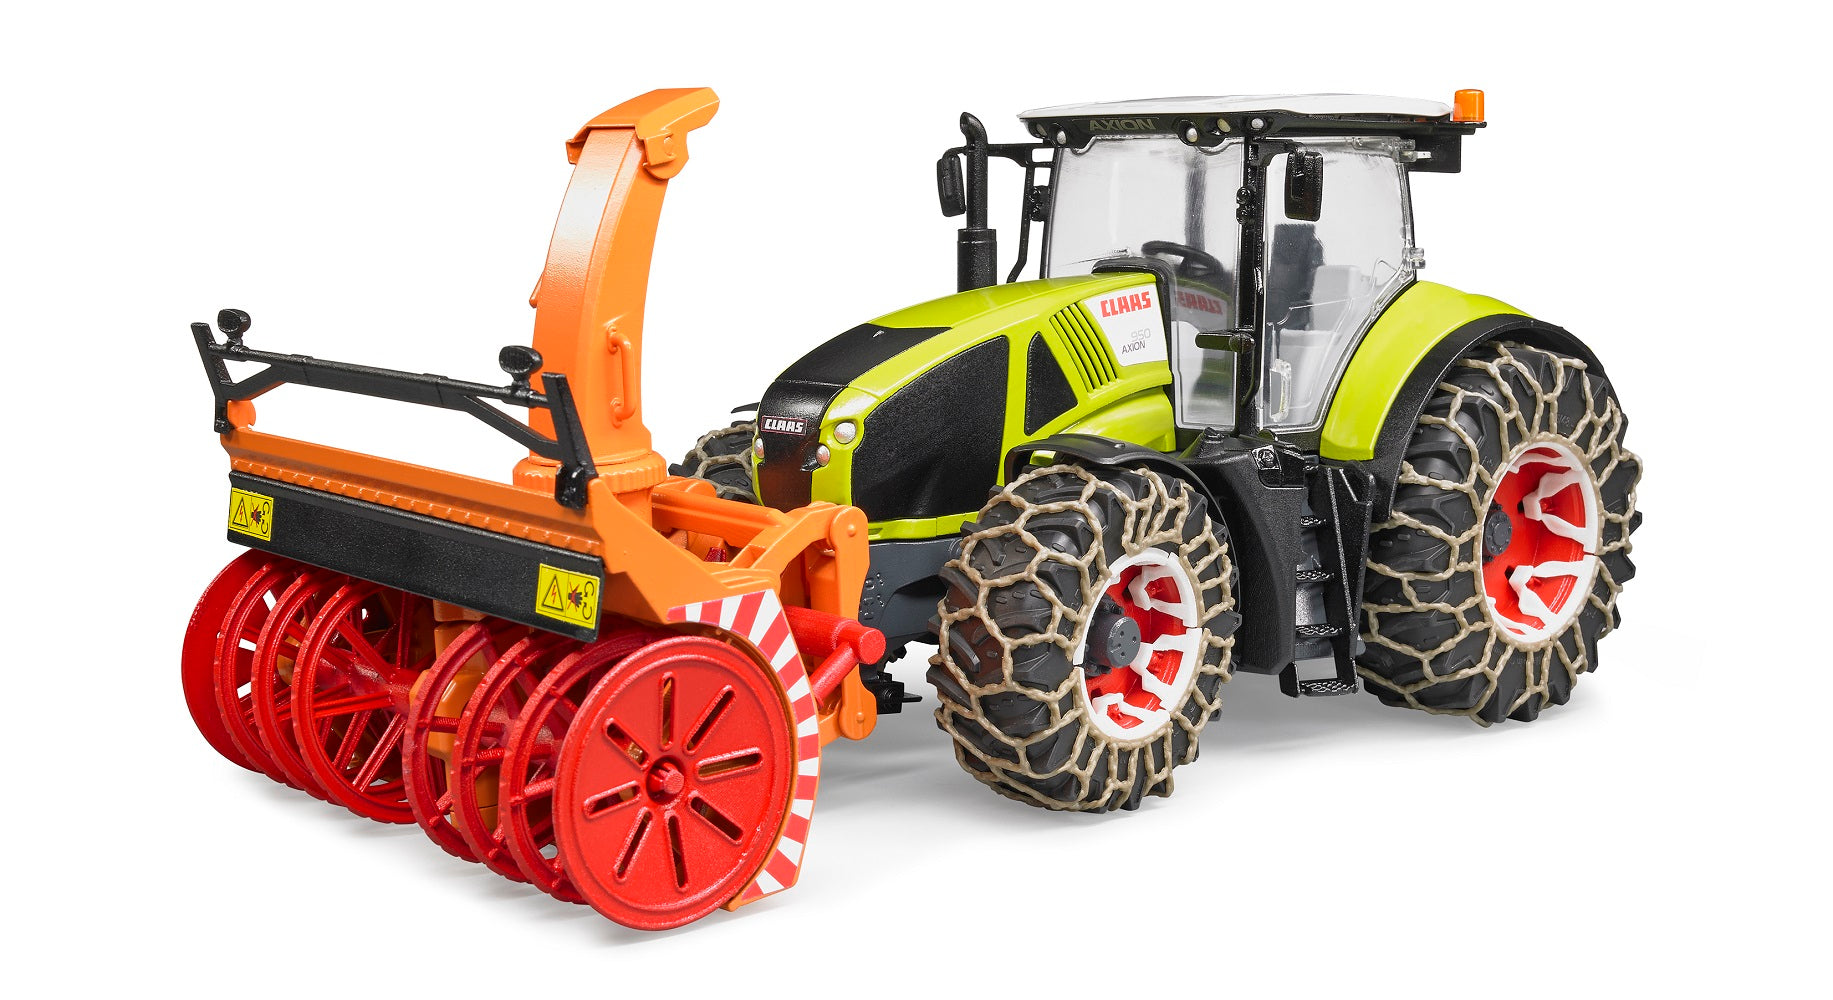 Bruder 03017 Claas Axion 950 w/ Snow Chains and Snow Blower - image 1 of 2